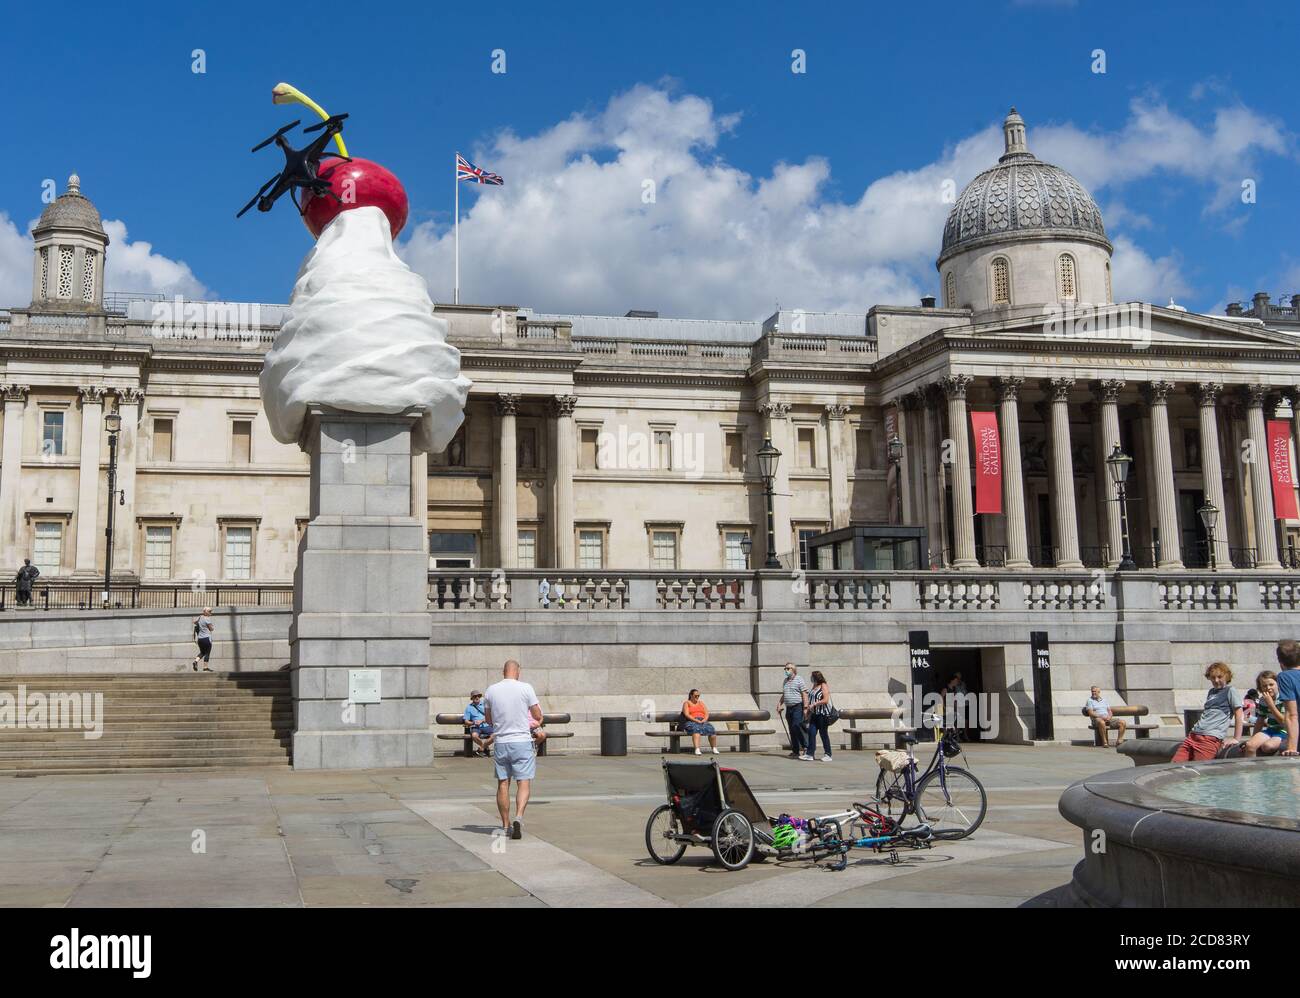 The End sculpture on the forth plinth in Trafalgar Square. Whipped cream, a fly and a drone on a cherry. Wide angle view. London Stock Photo